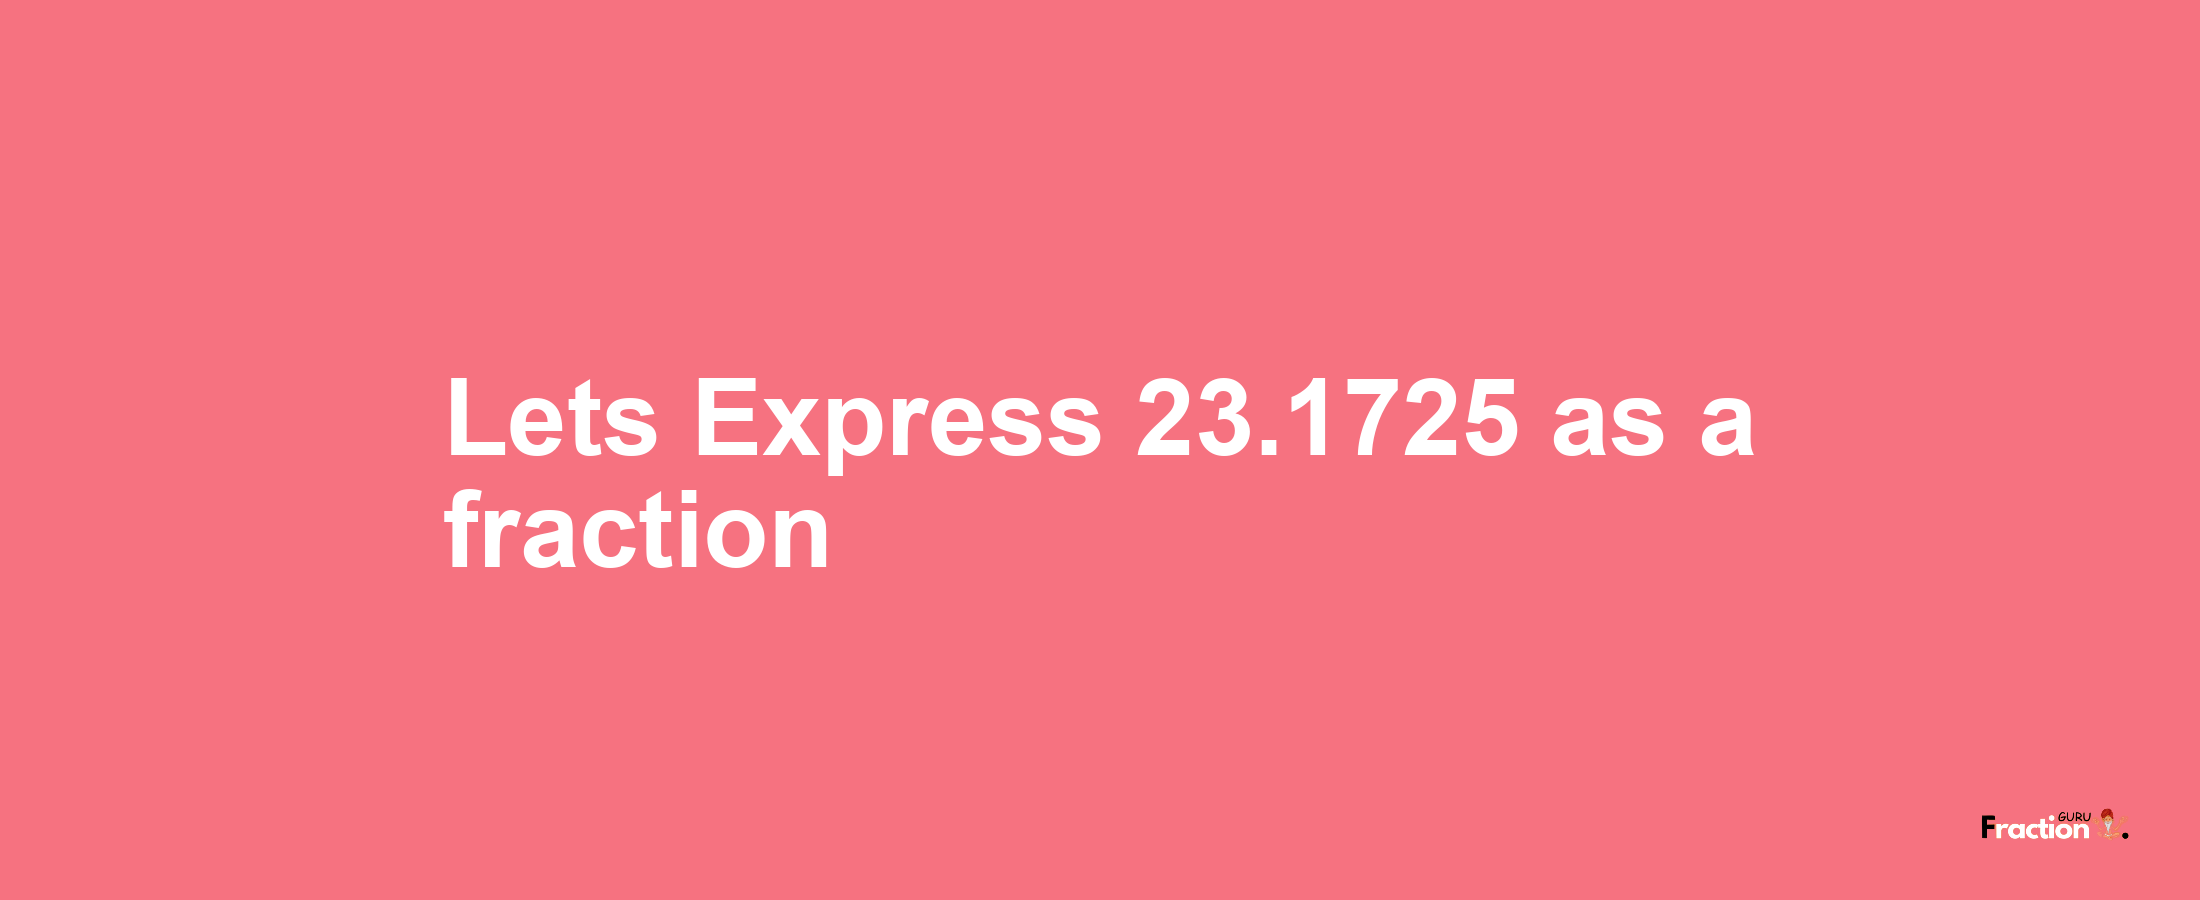 Lets Express 23.1725 as afraction